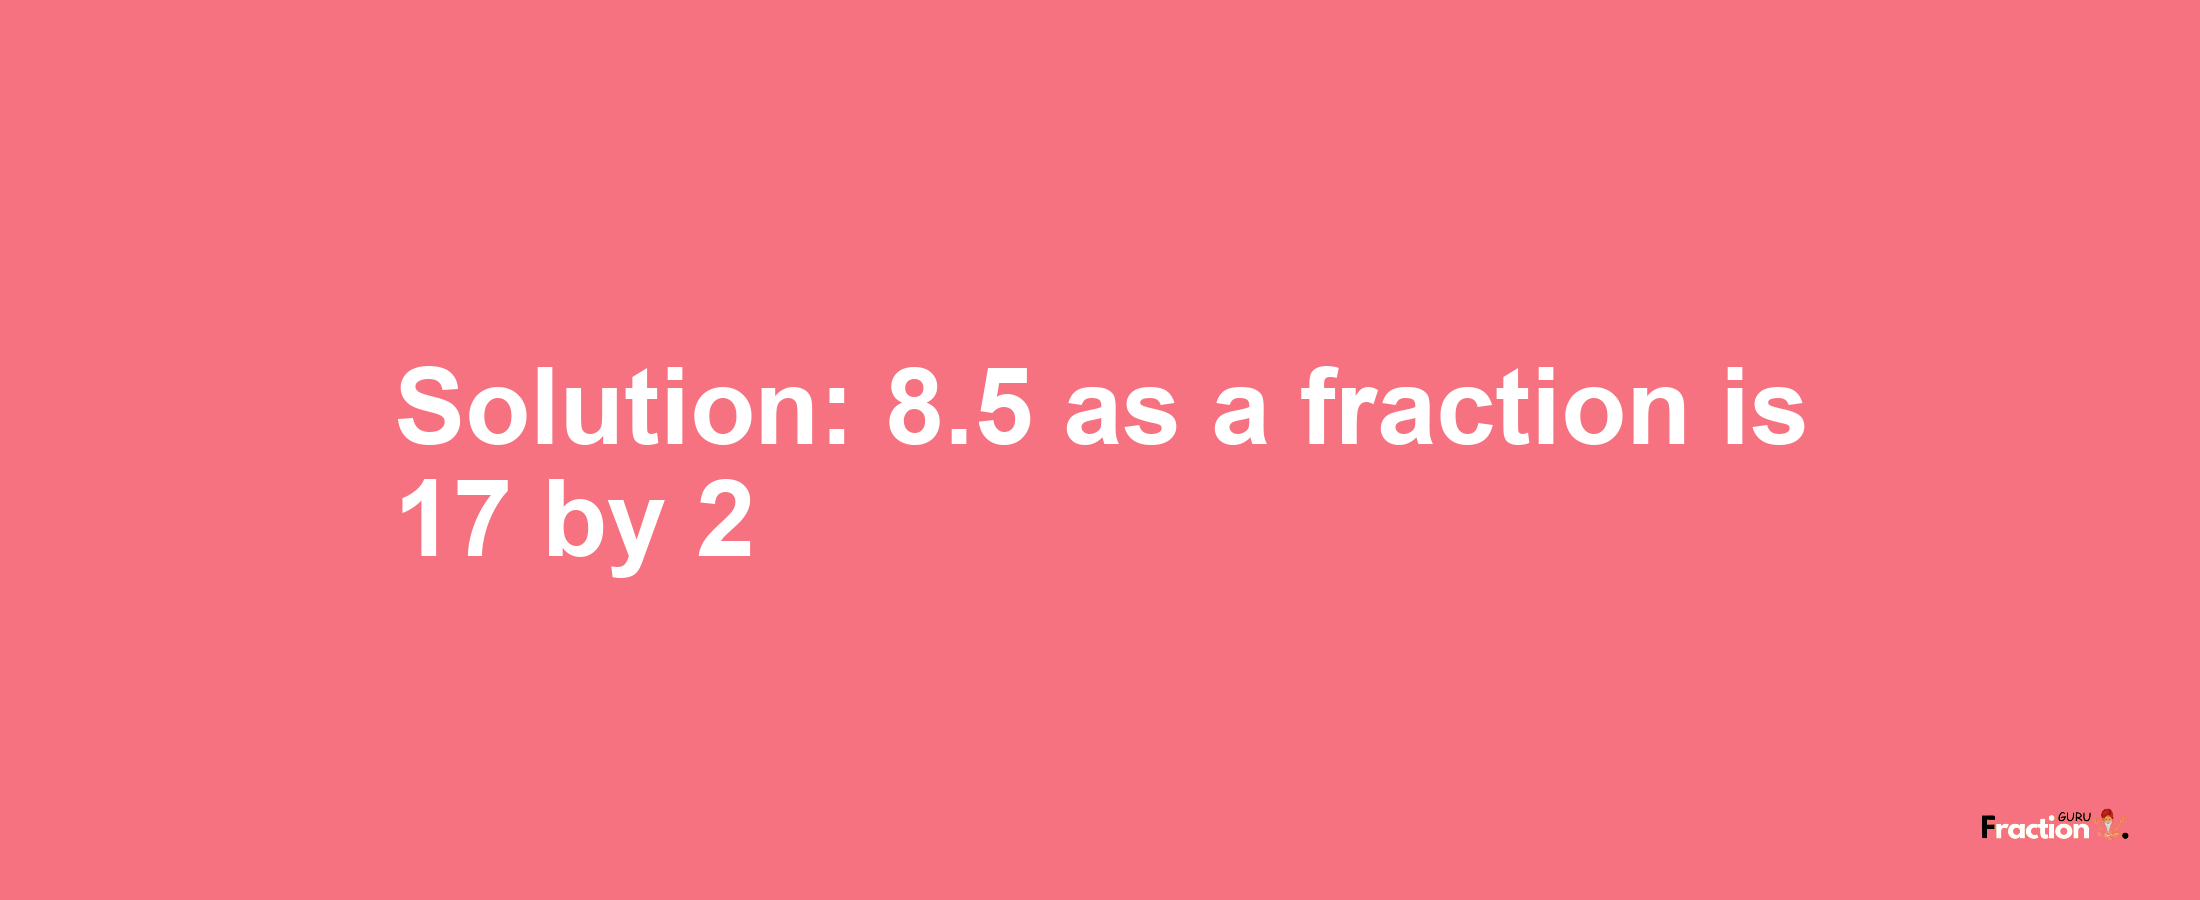 Solution:8.5 as a fraction is 17/2